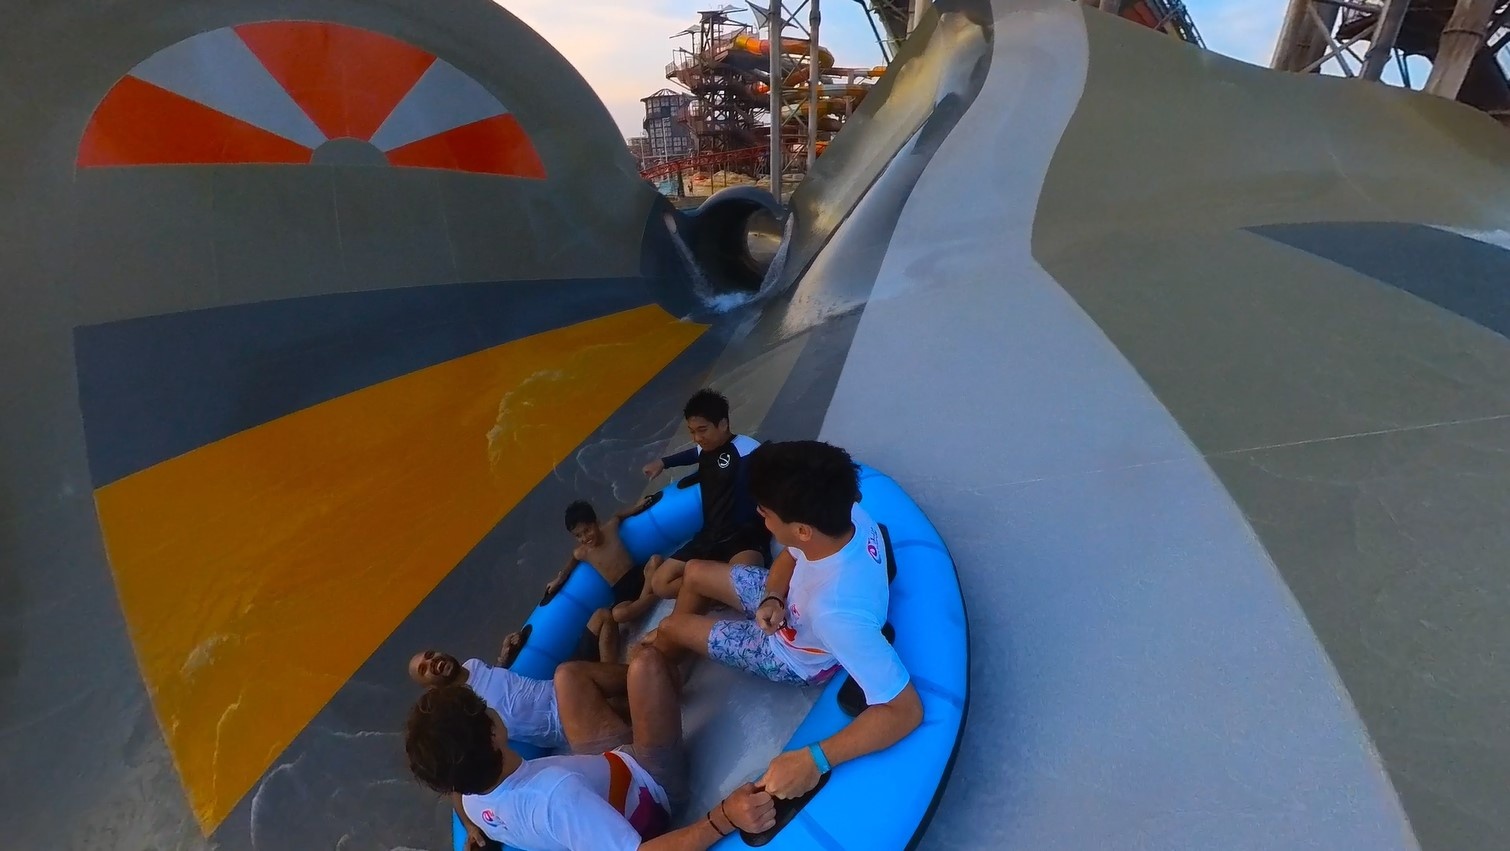 People in a raft on a water slide through a Manta section